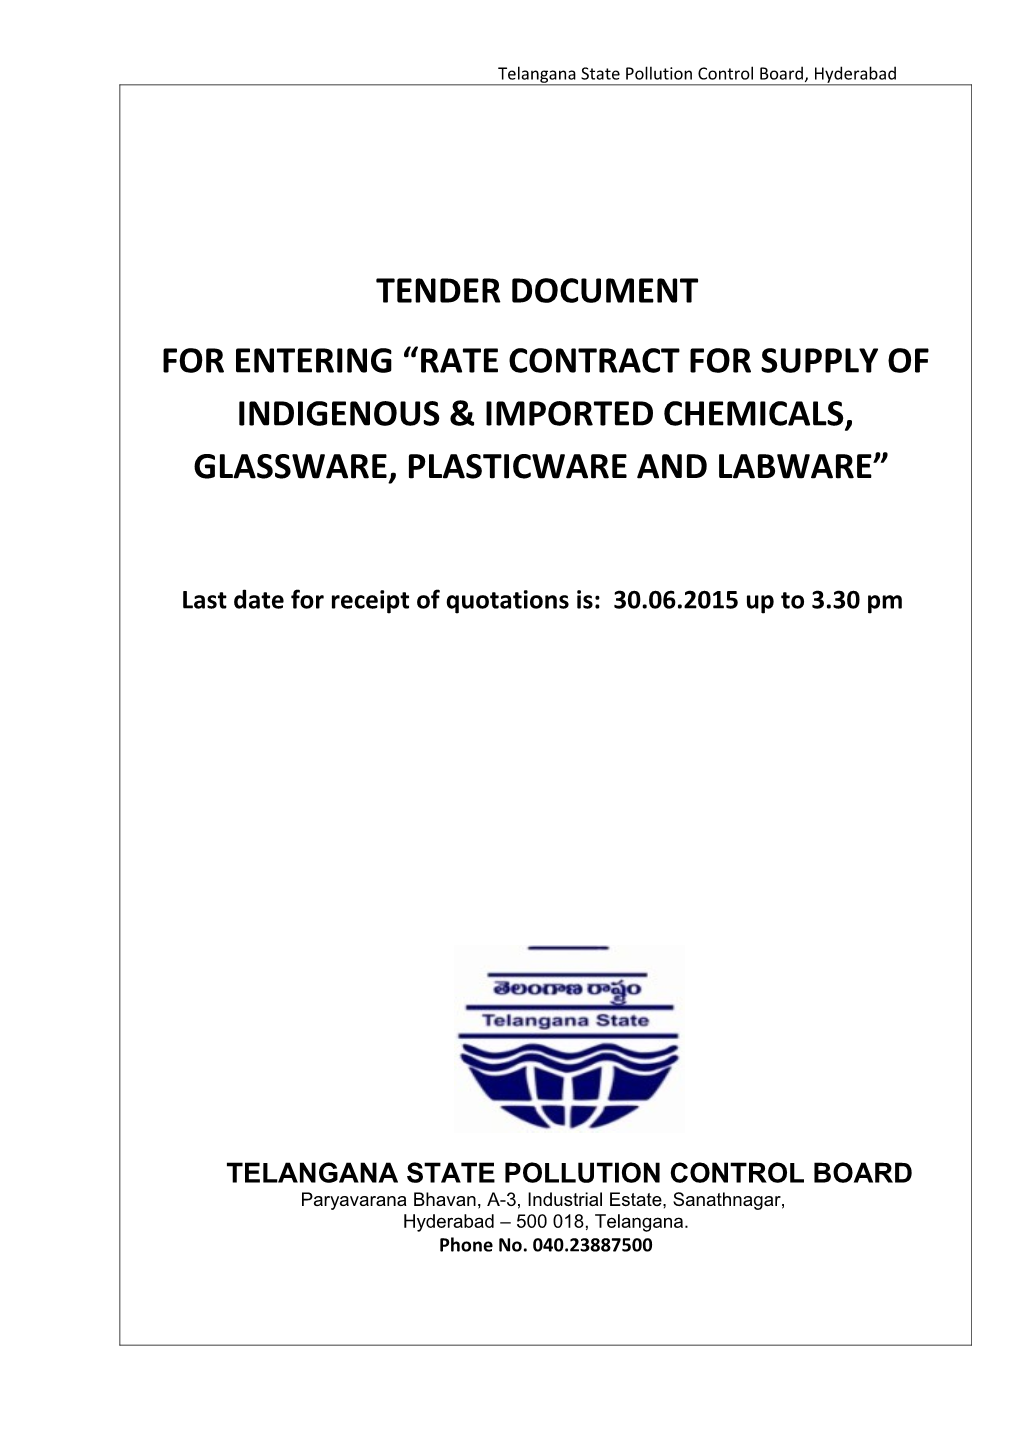 For Entering Rate Contract for SUPPLY of Indigenous &